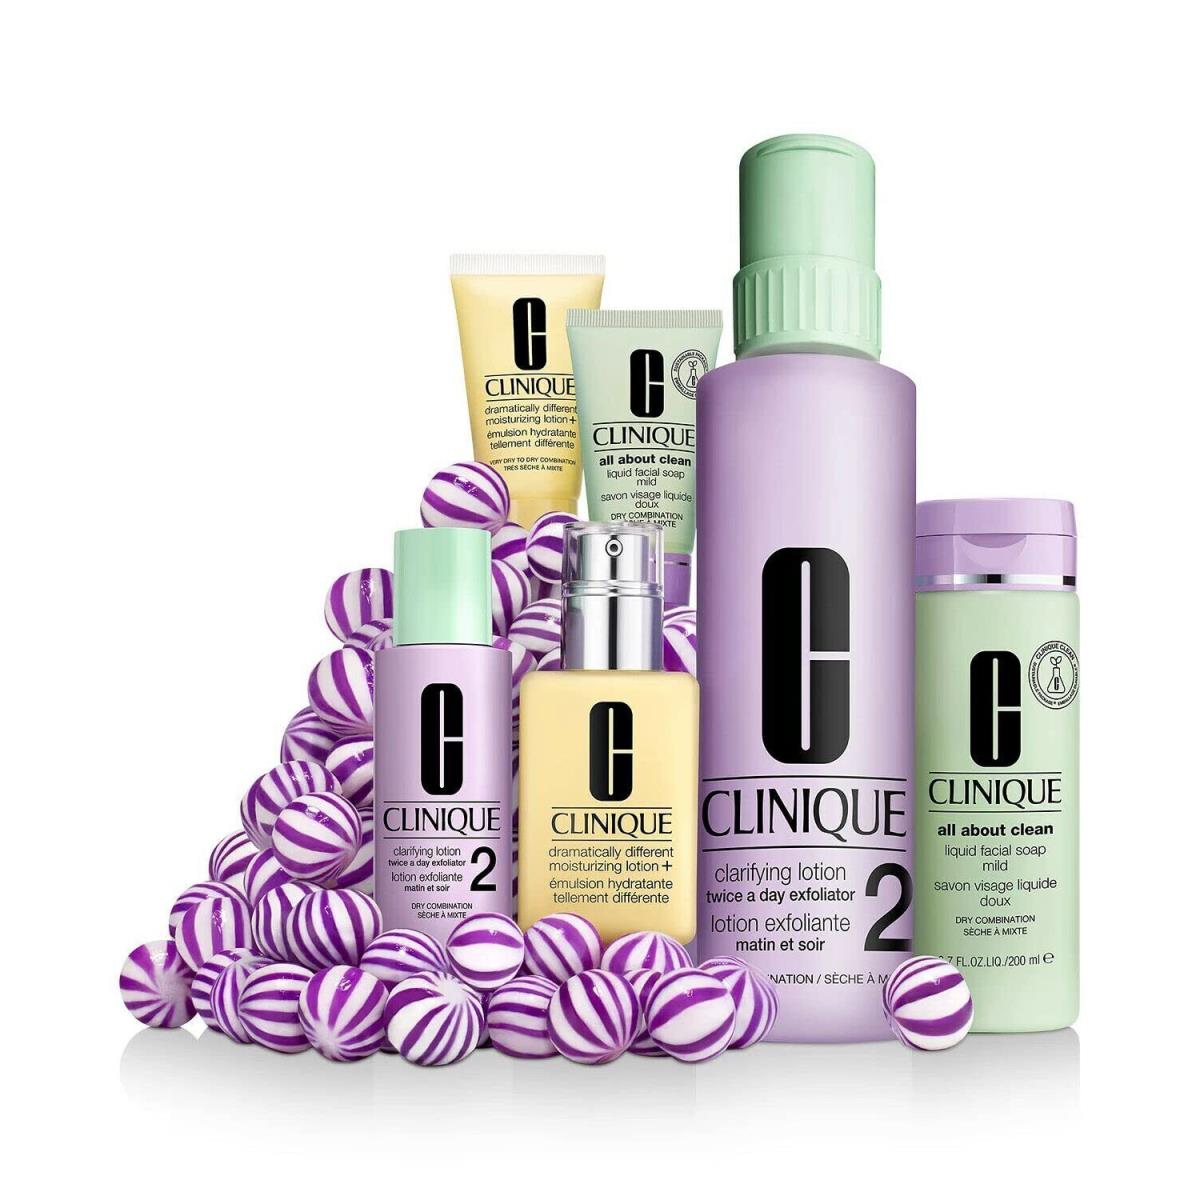 Clinique 2 Great Skin Everywhere For Dry Combination Skin 6 Piece Set